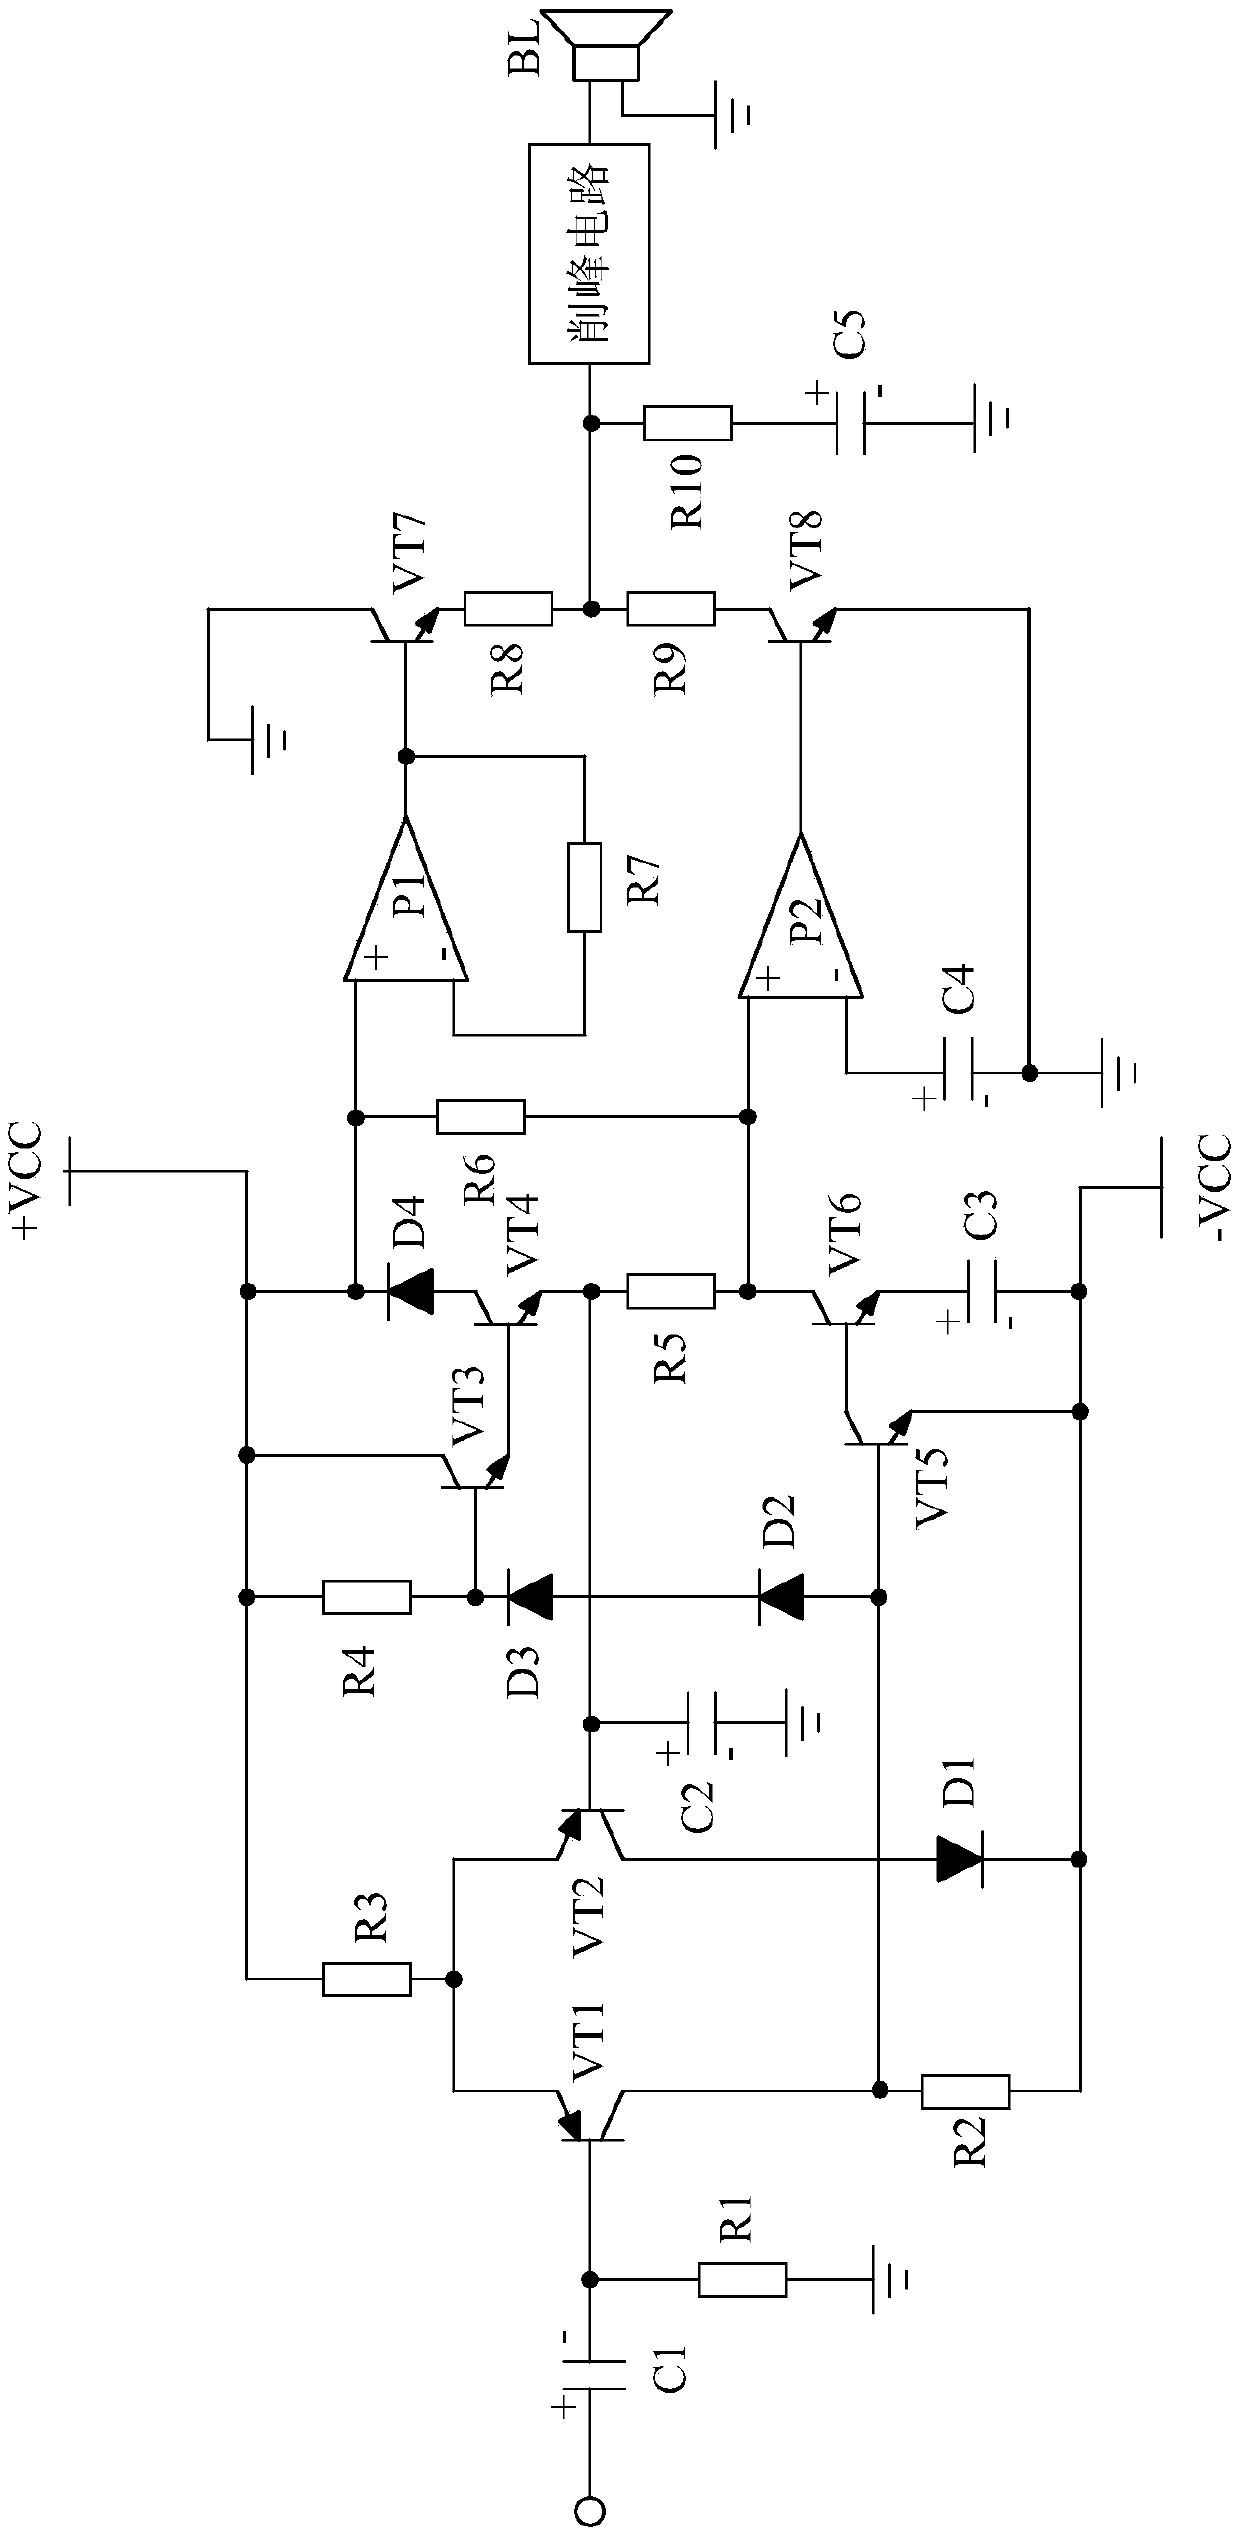 Low-distortion power amplifier system based on peak-clipping circuit